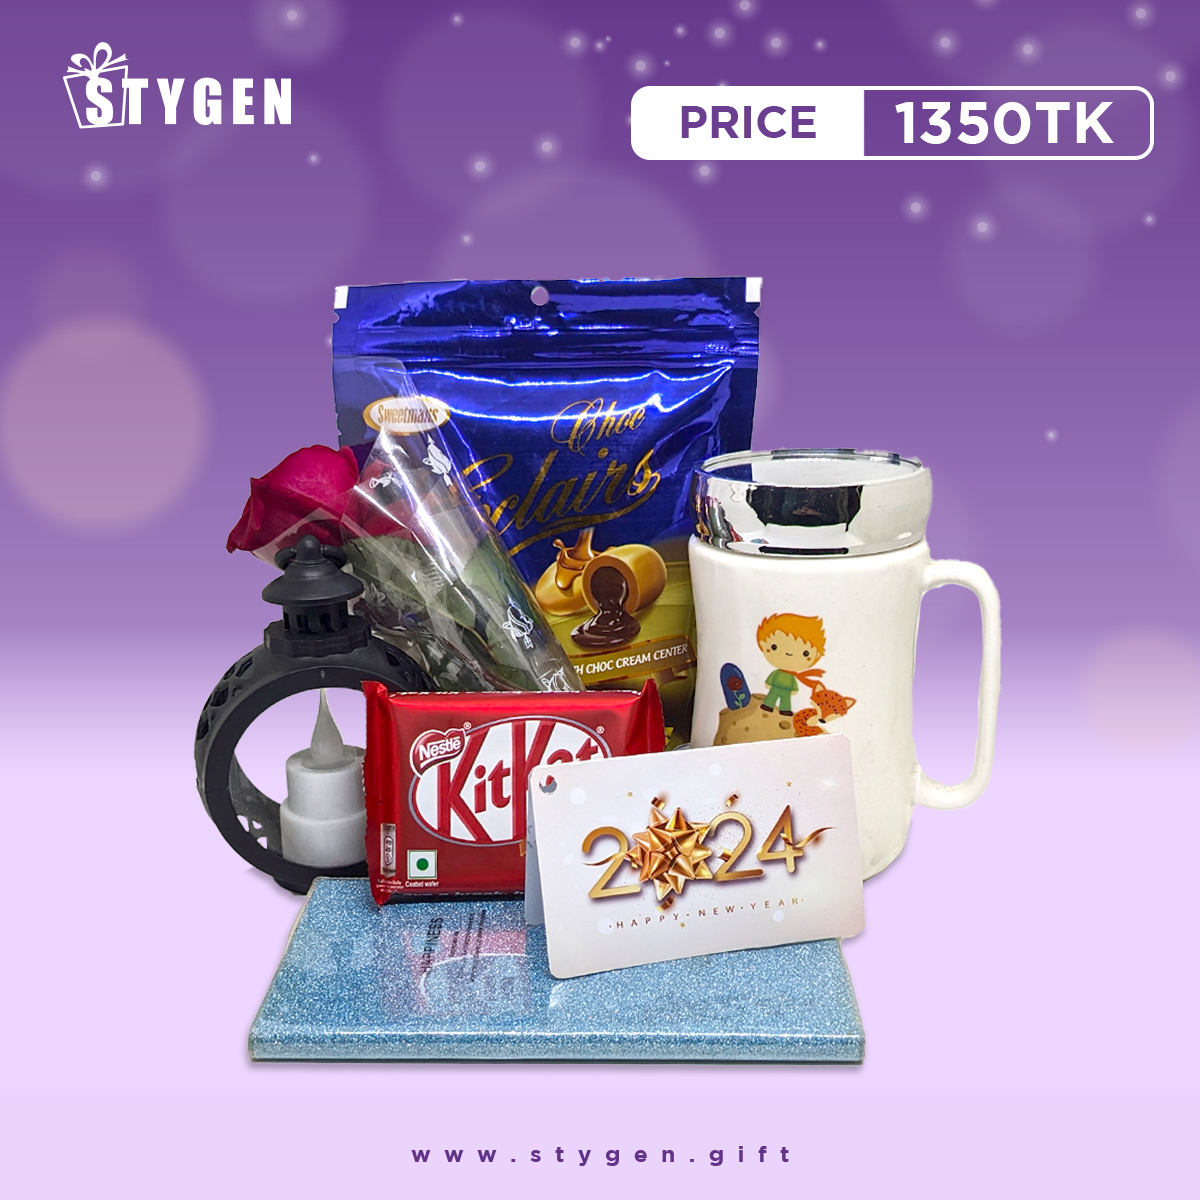 New year Gift Hamper For Your Loved One (15)